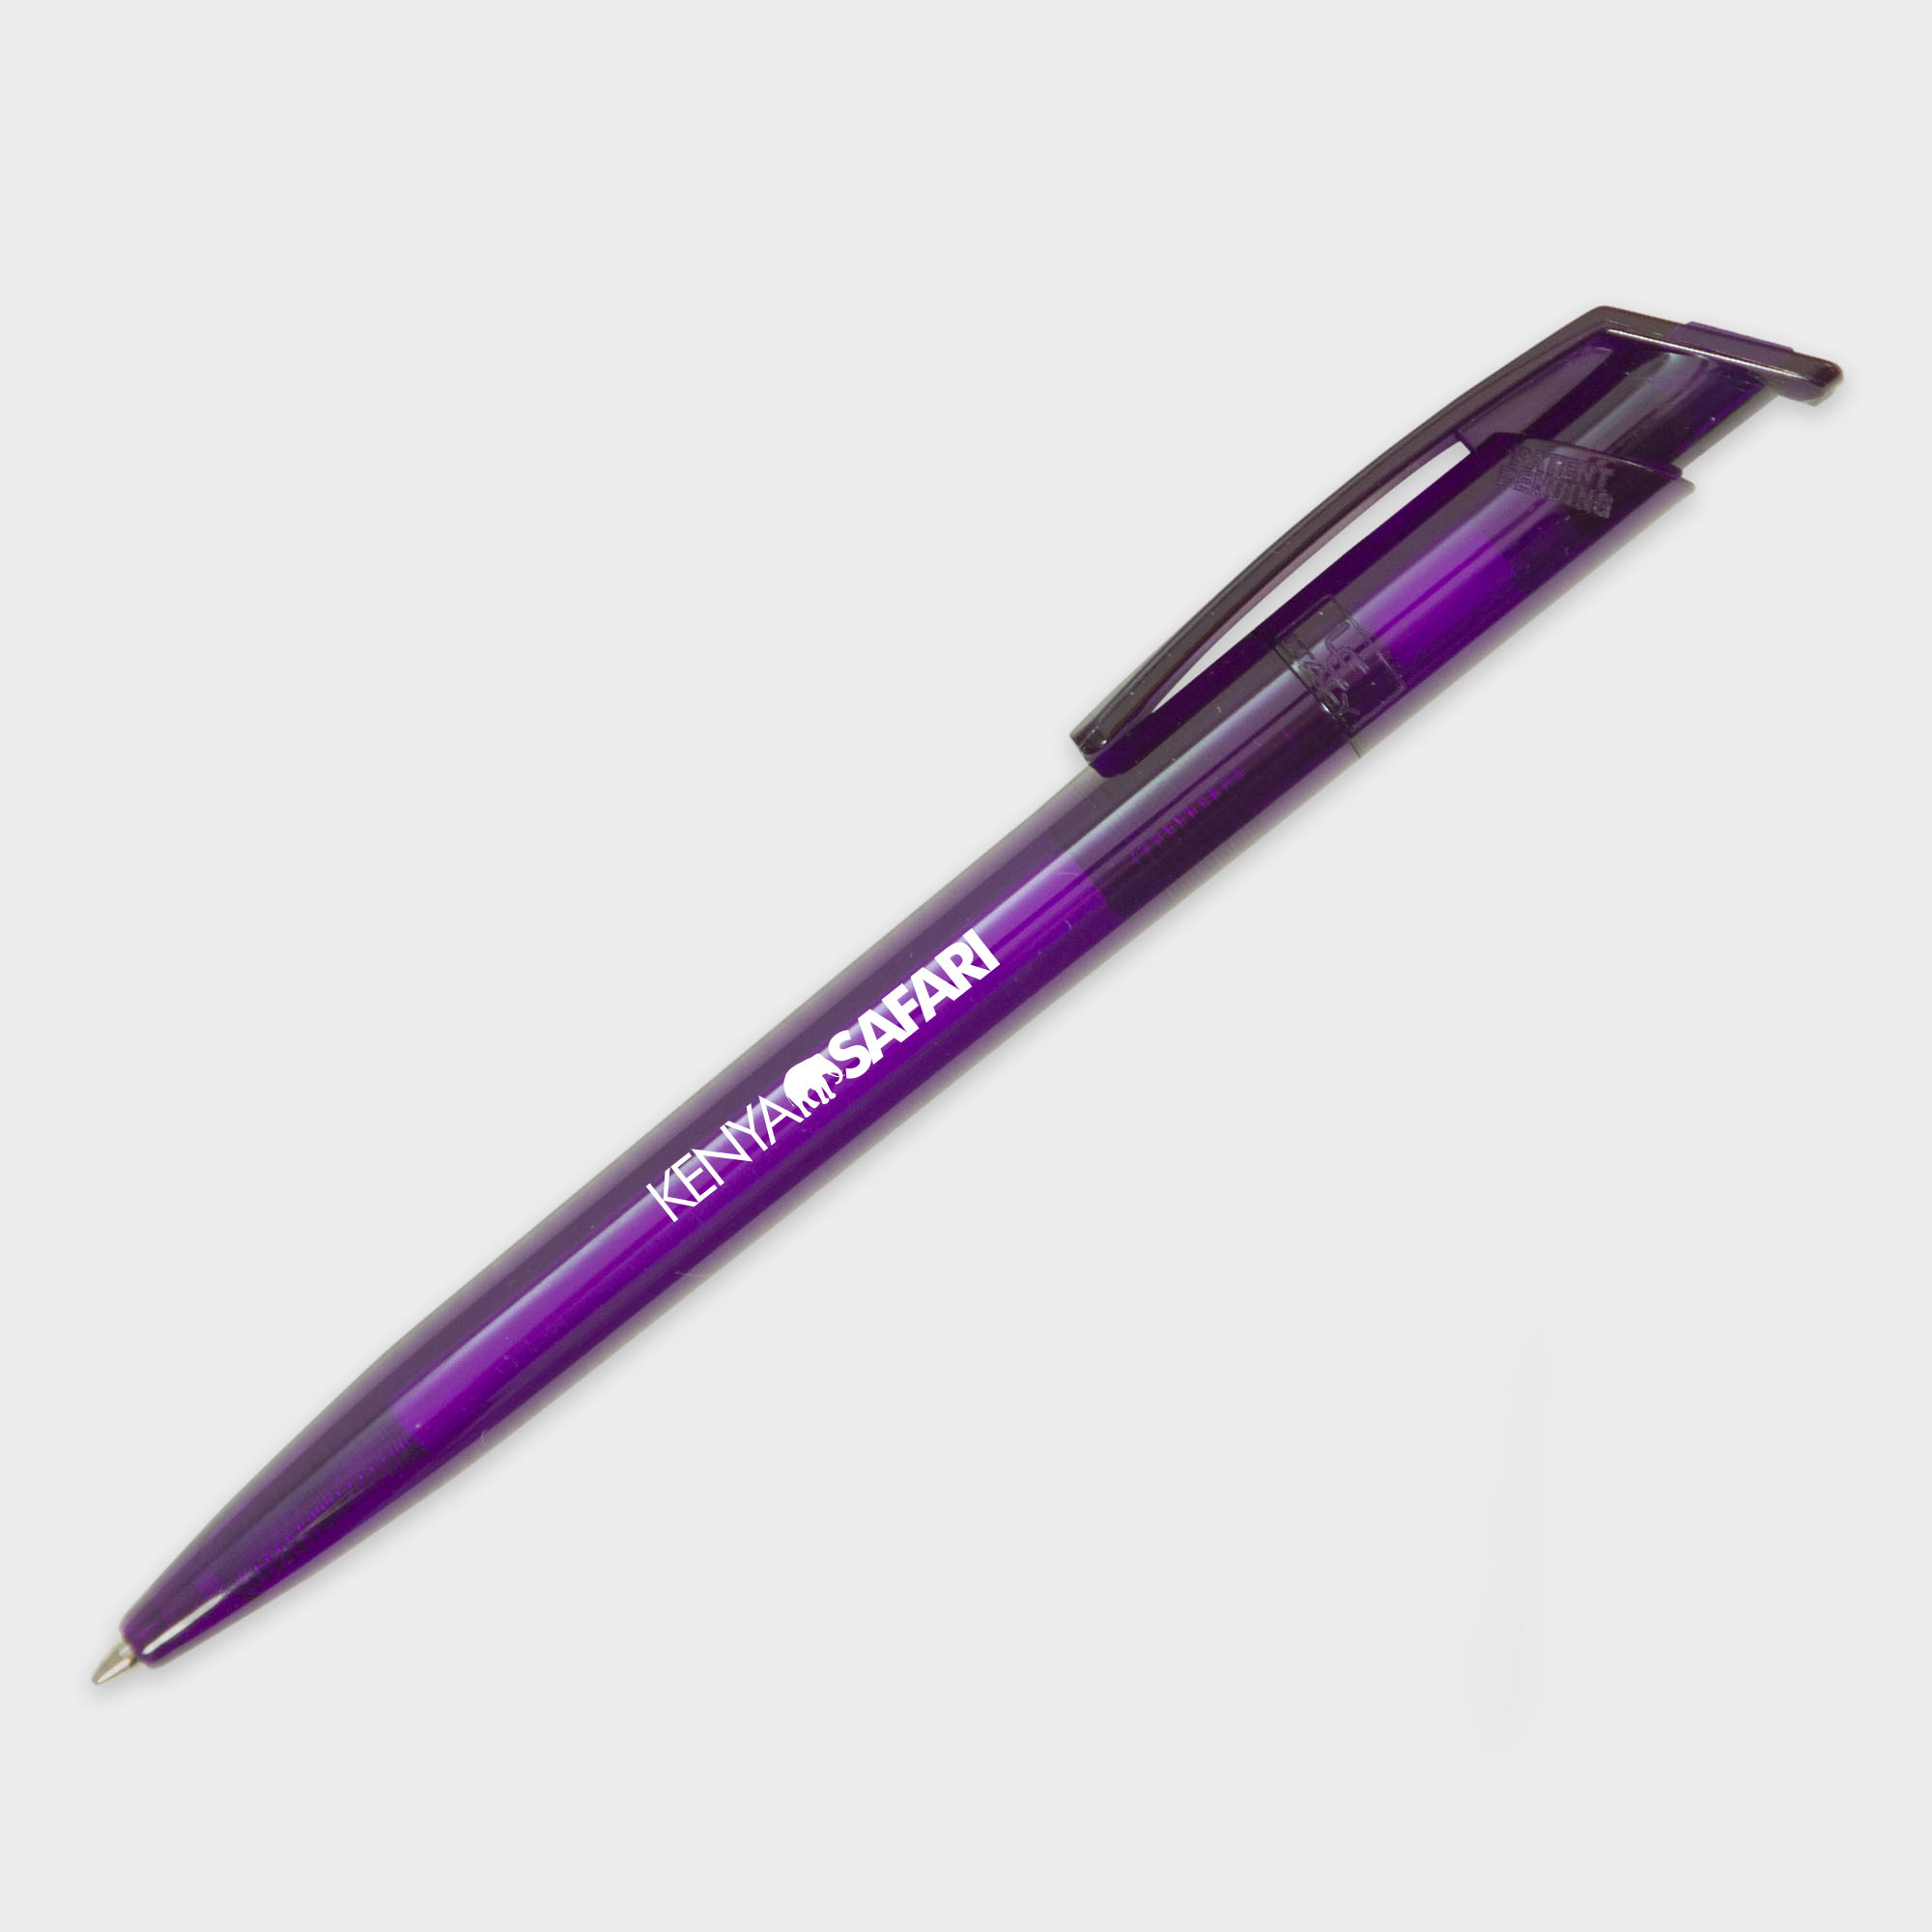 The Green & Good Litani Pen. An eco-friendly and high-quality pen made from recycled plastic bottles (rPET) with black ink refills and a frosted body. Made in the EU and available in a variety of colours. Purple